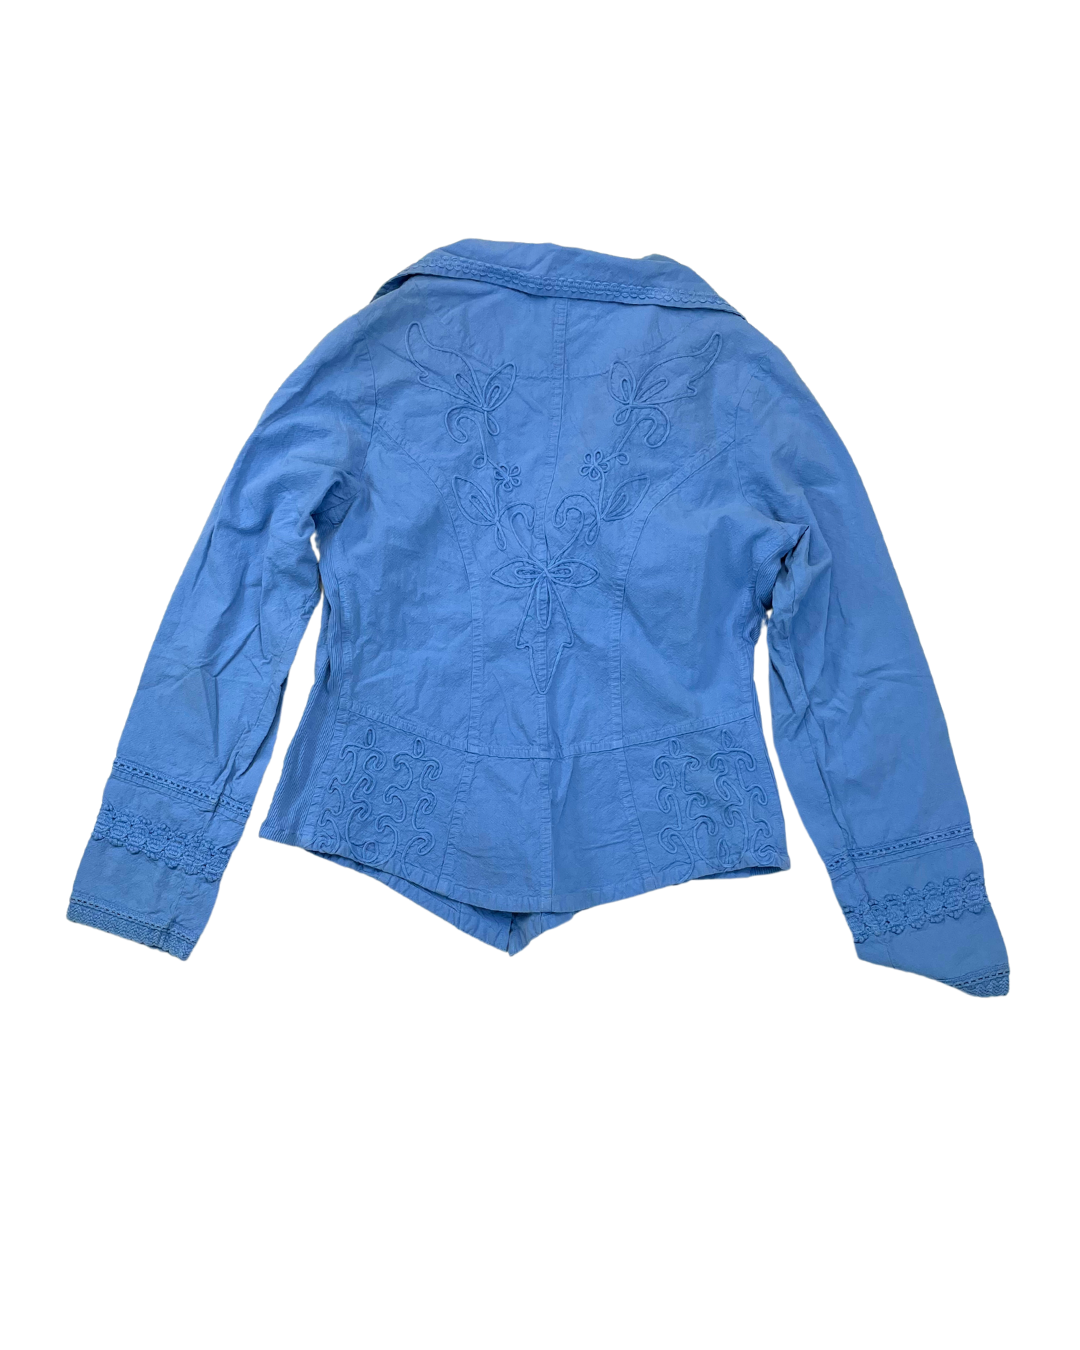 Gretty Zueger Blue Embroidered Jacket